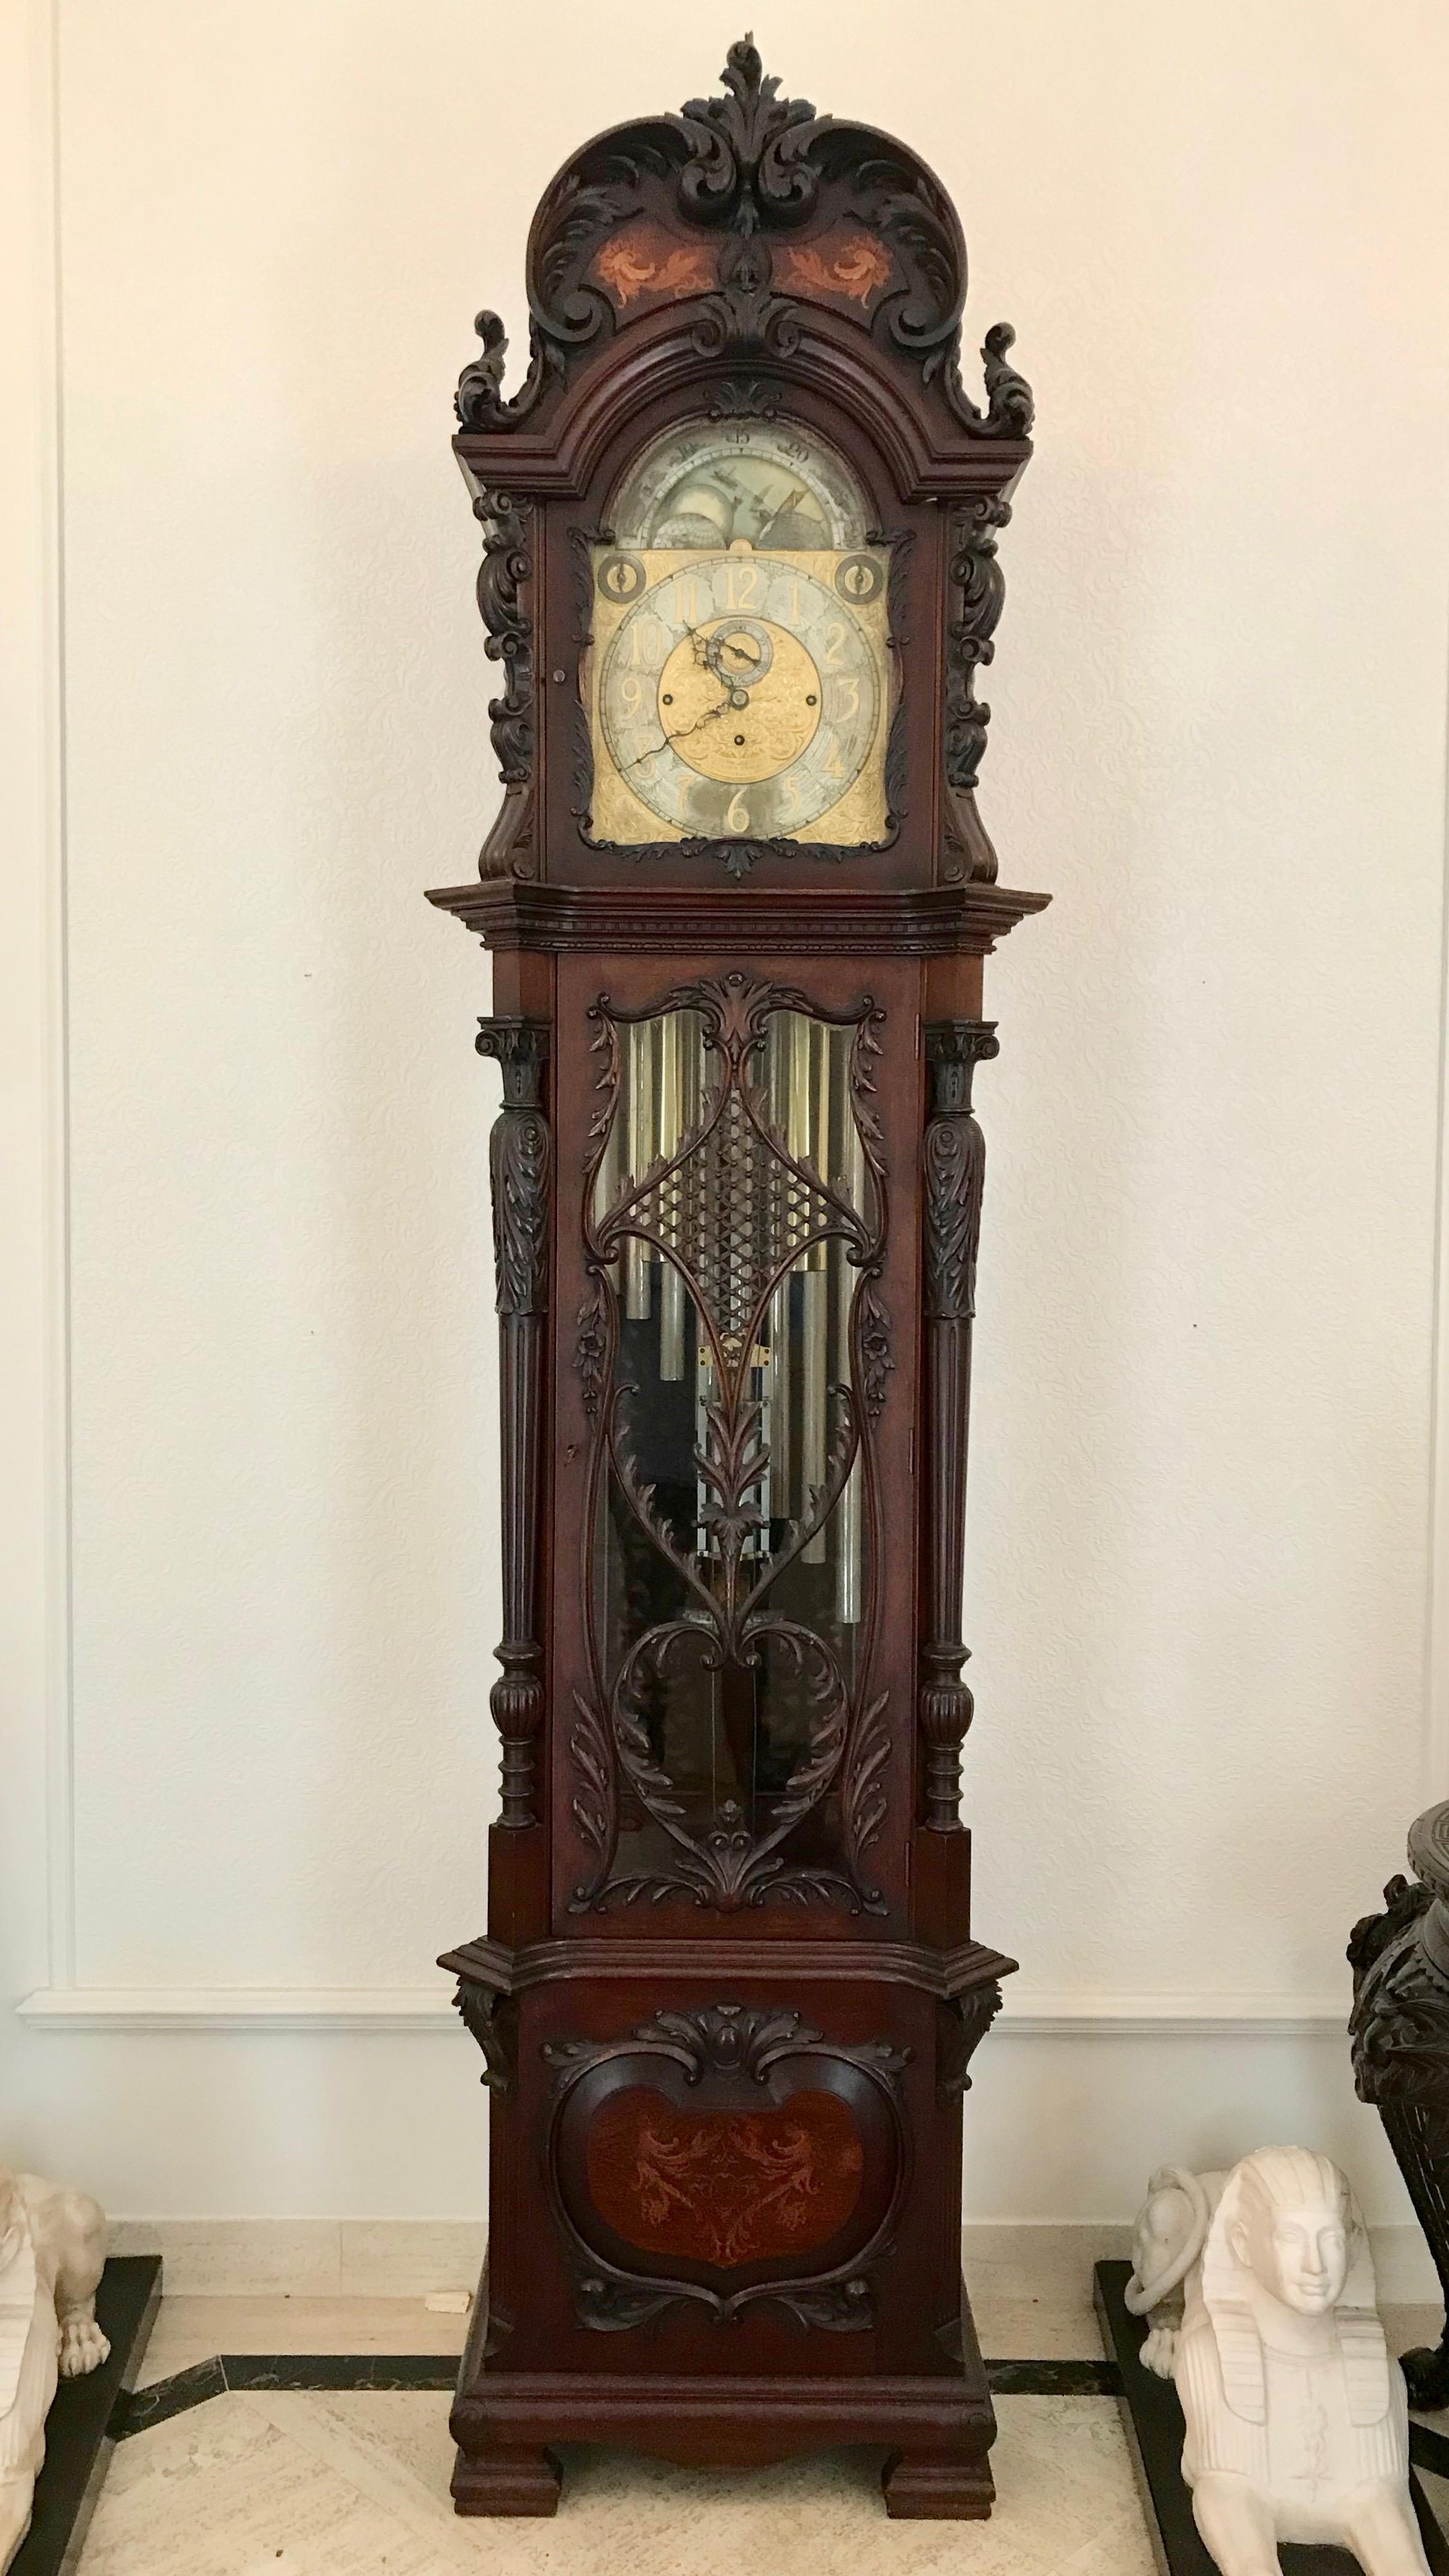 The clock is formed with an elaborate richly carved case featuring elaborate
fret work and exotic inlays at its crown.
The 